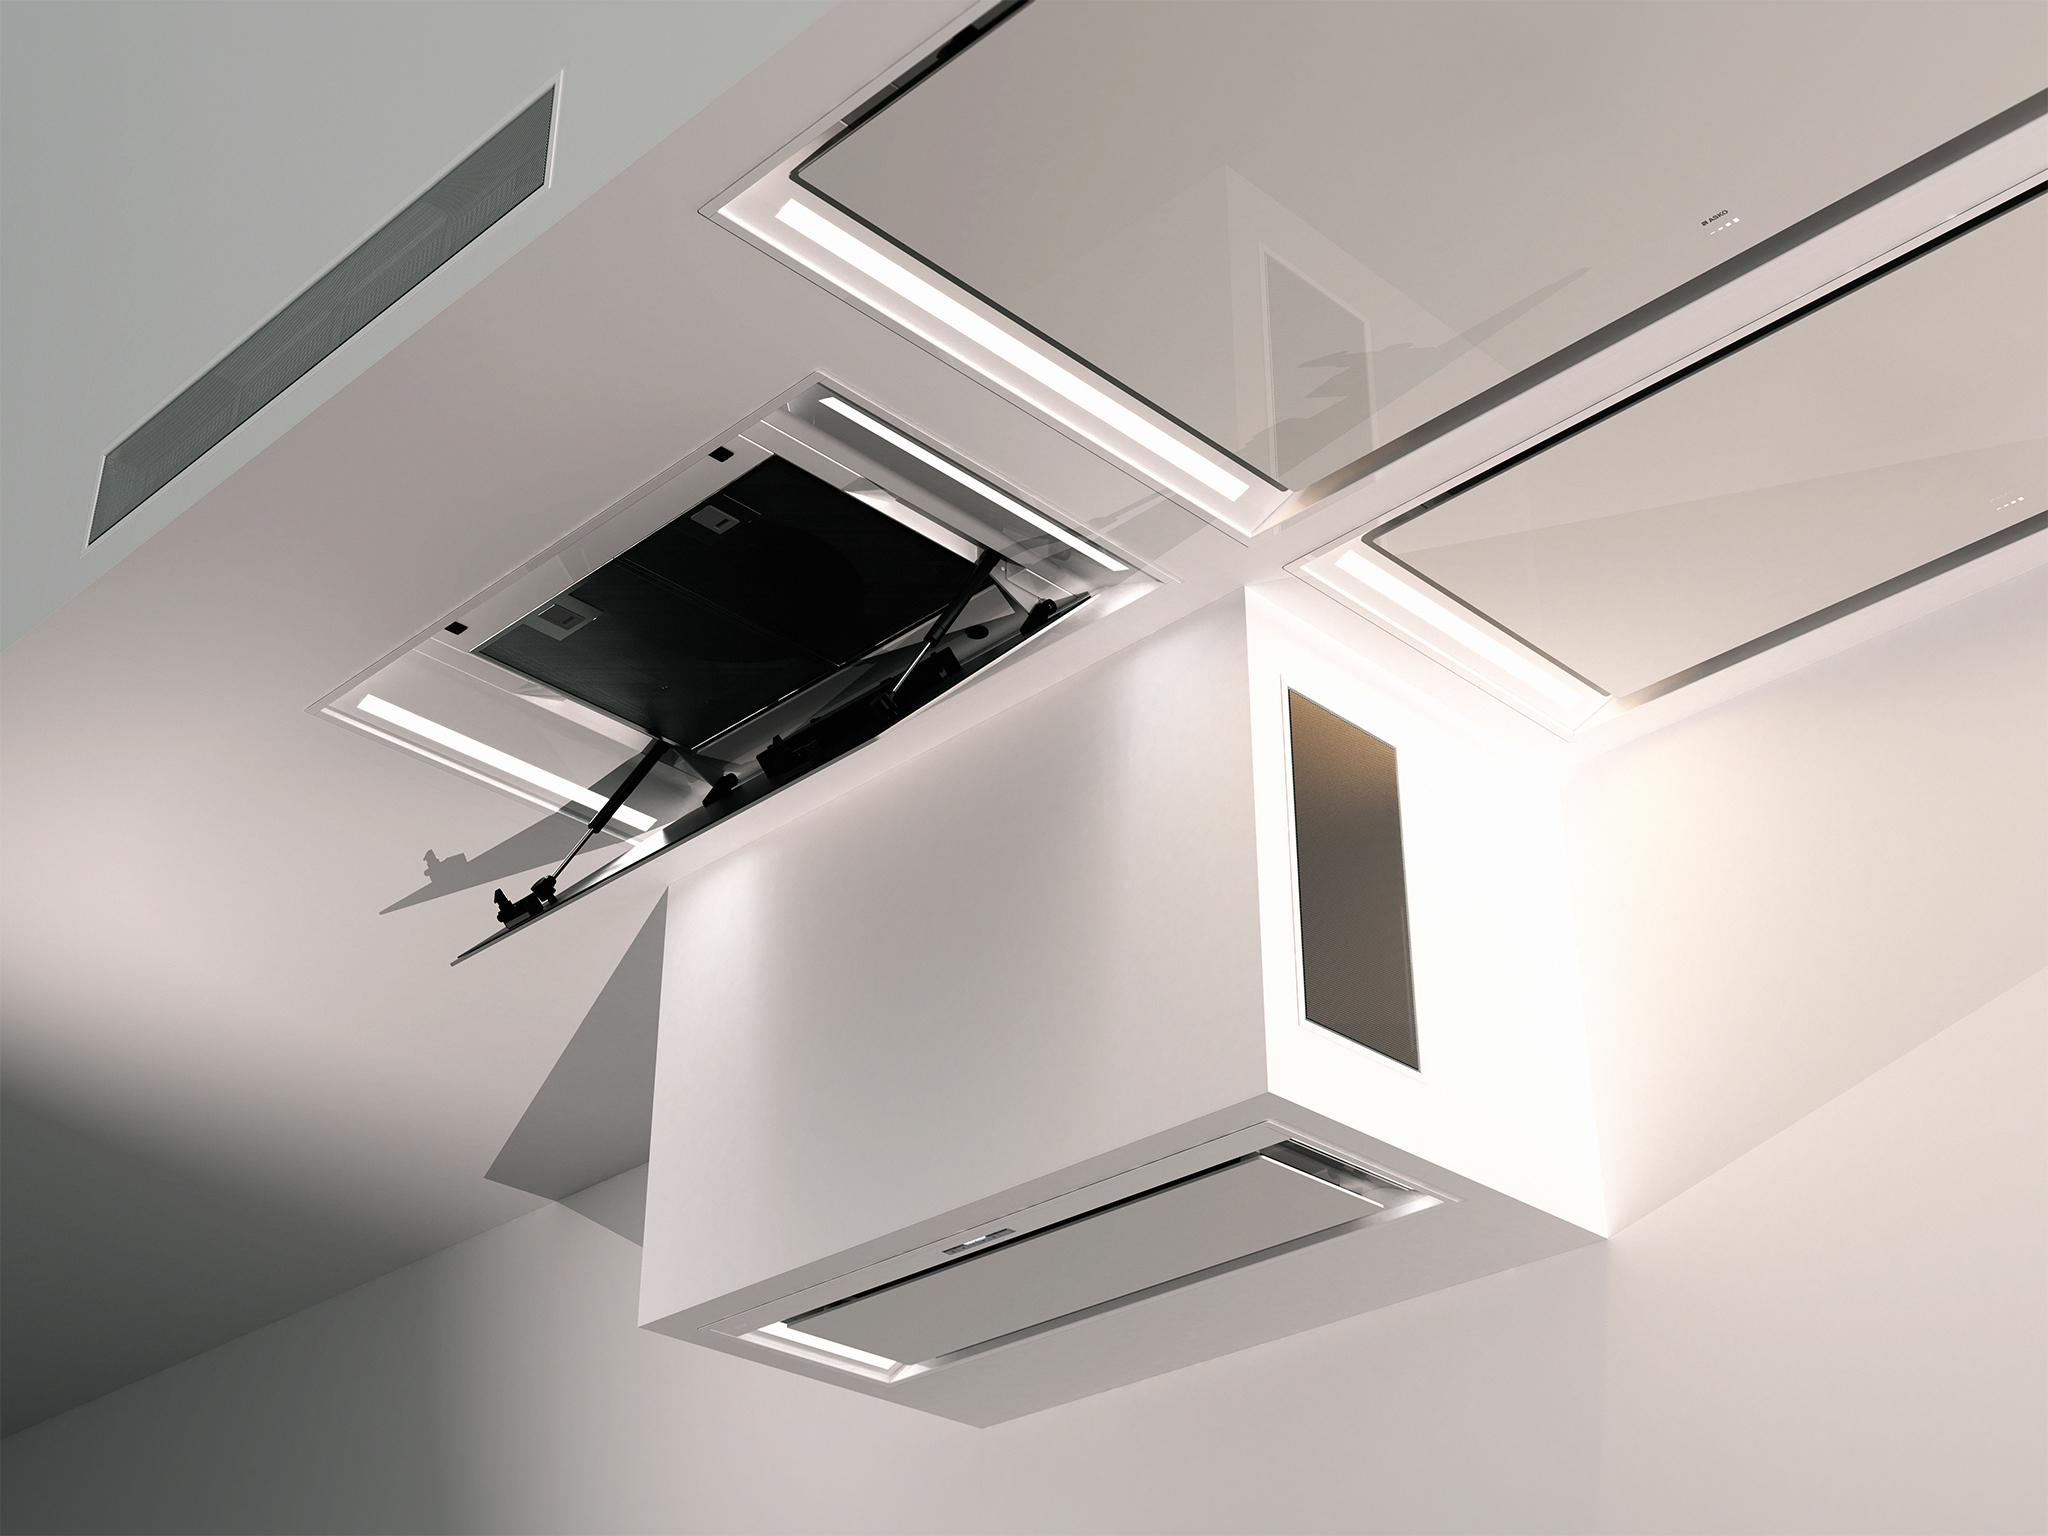 ASKO Elements built-in and ceiling cooker hoods